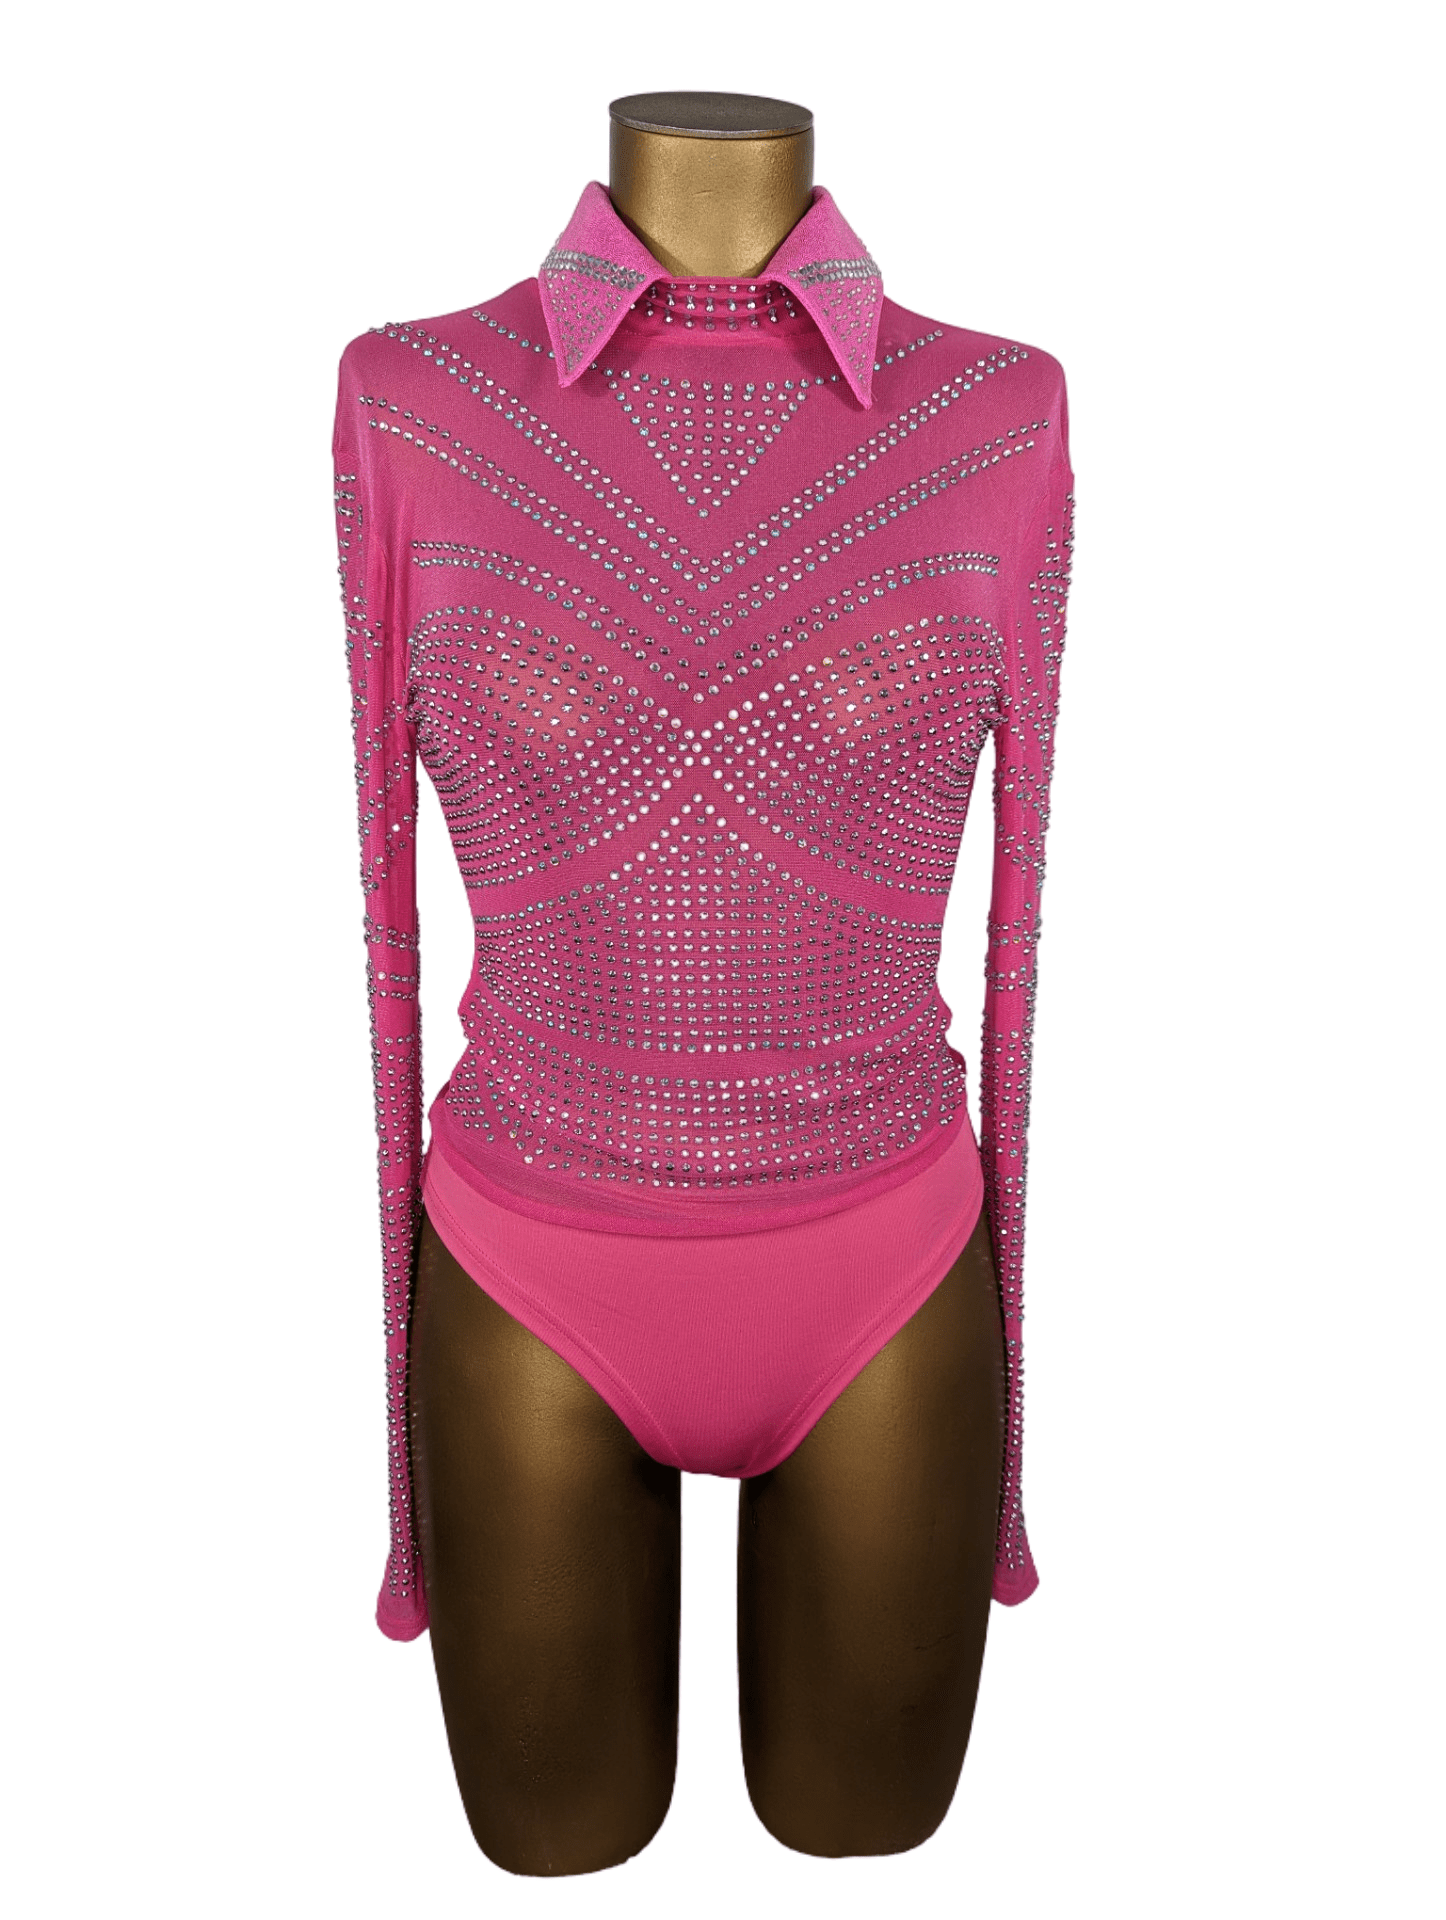 sparkle-ridge-womens-western-wear-affordable-show-clothes-horse-shirts-with-bling-rodeo-bodysuit-bright-pink-eras-front.png (Copy) (Copy)